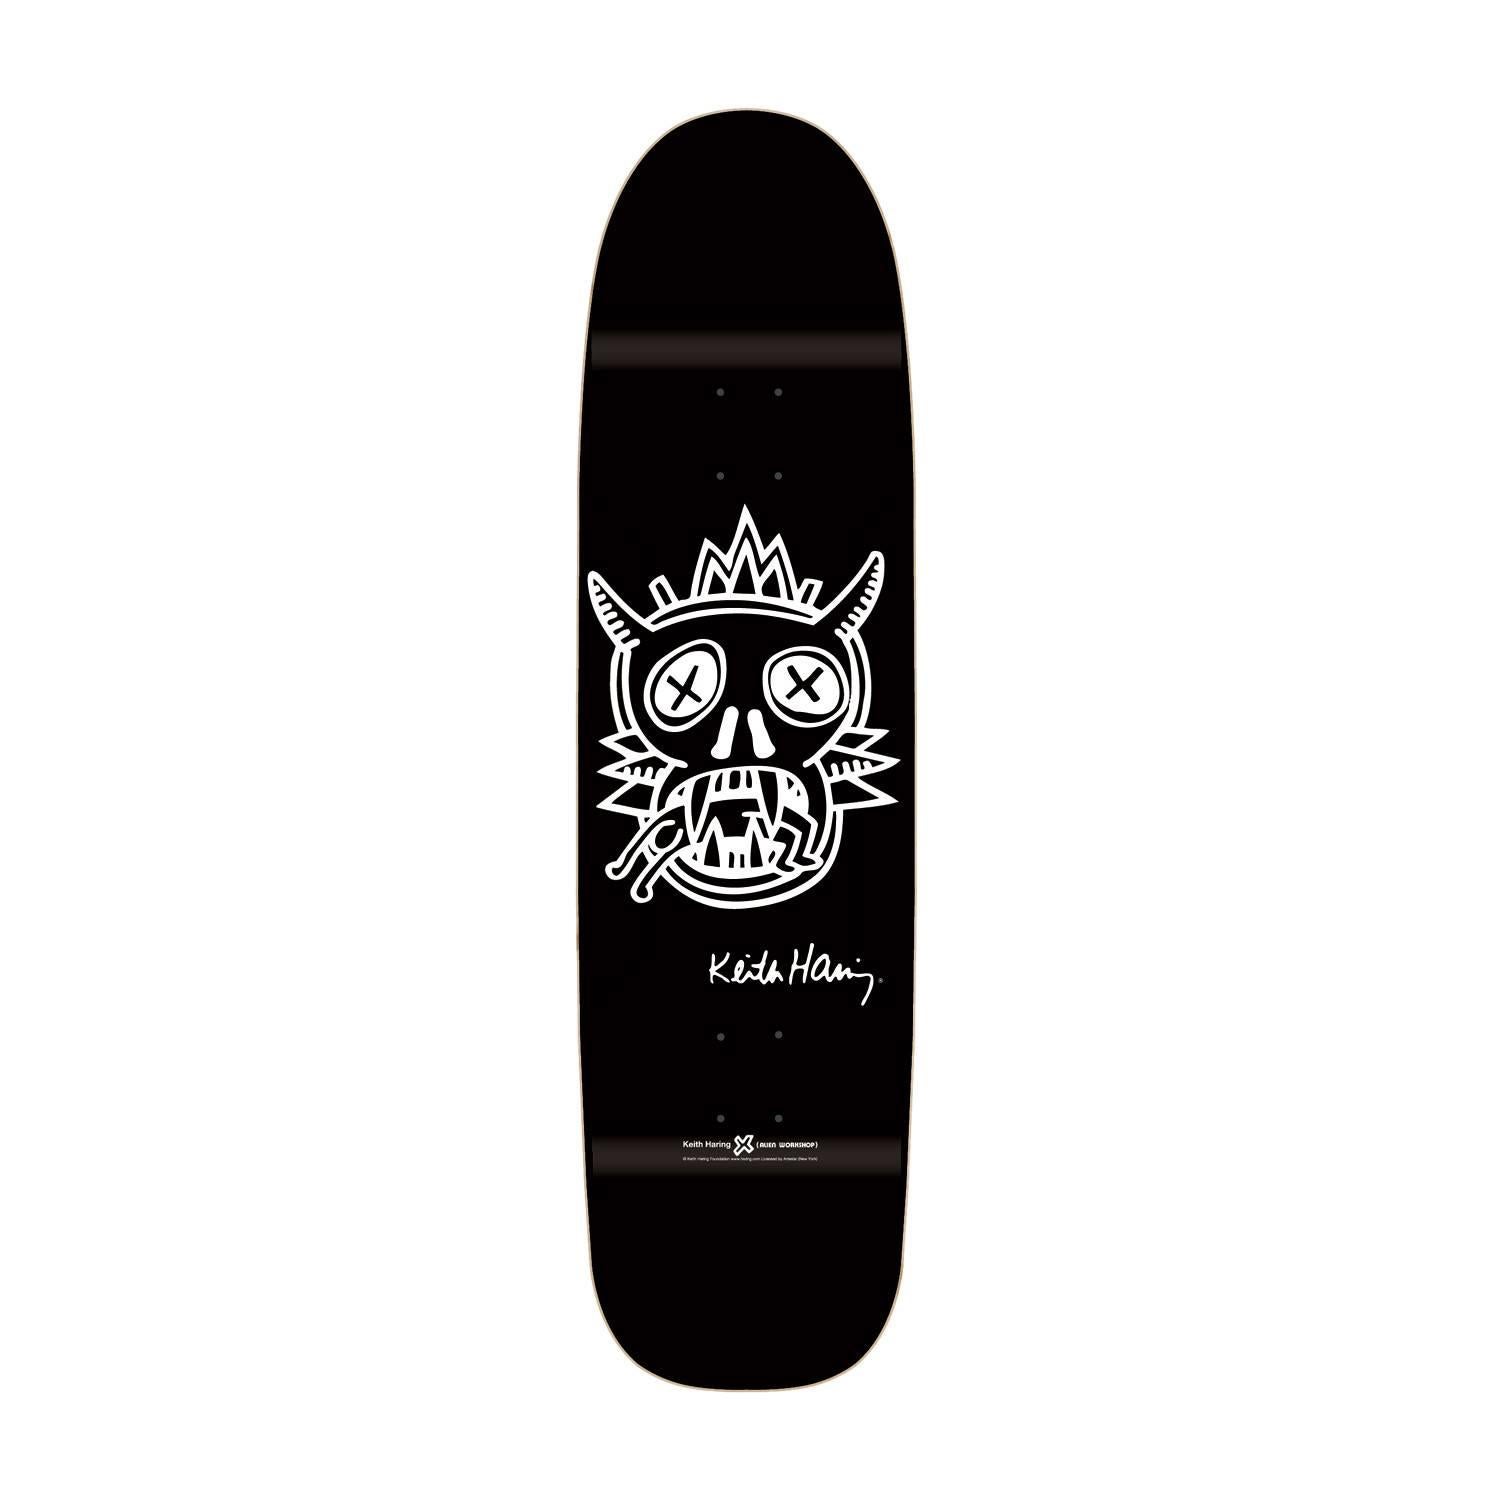 Keith Haring Skateboard Deck (Black) - Art by (after) Keith Haring